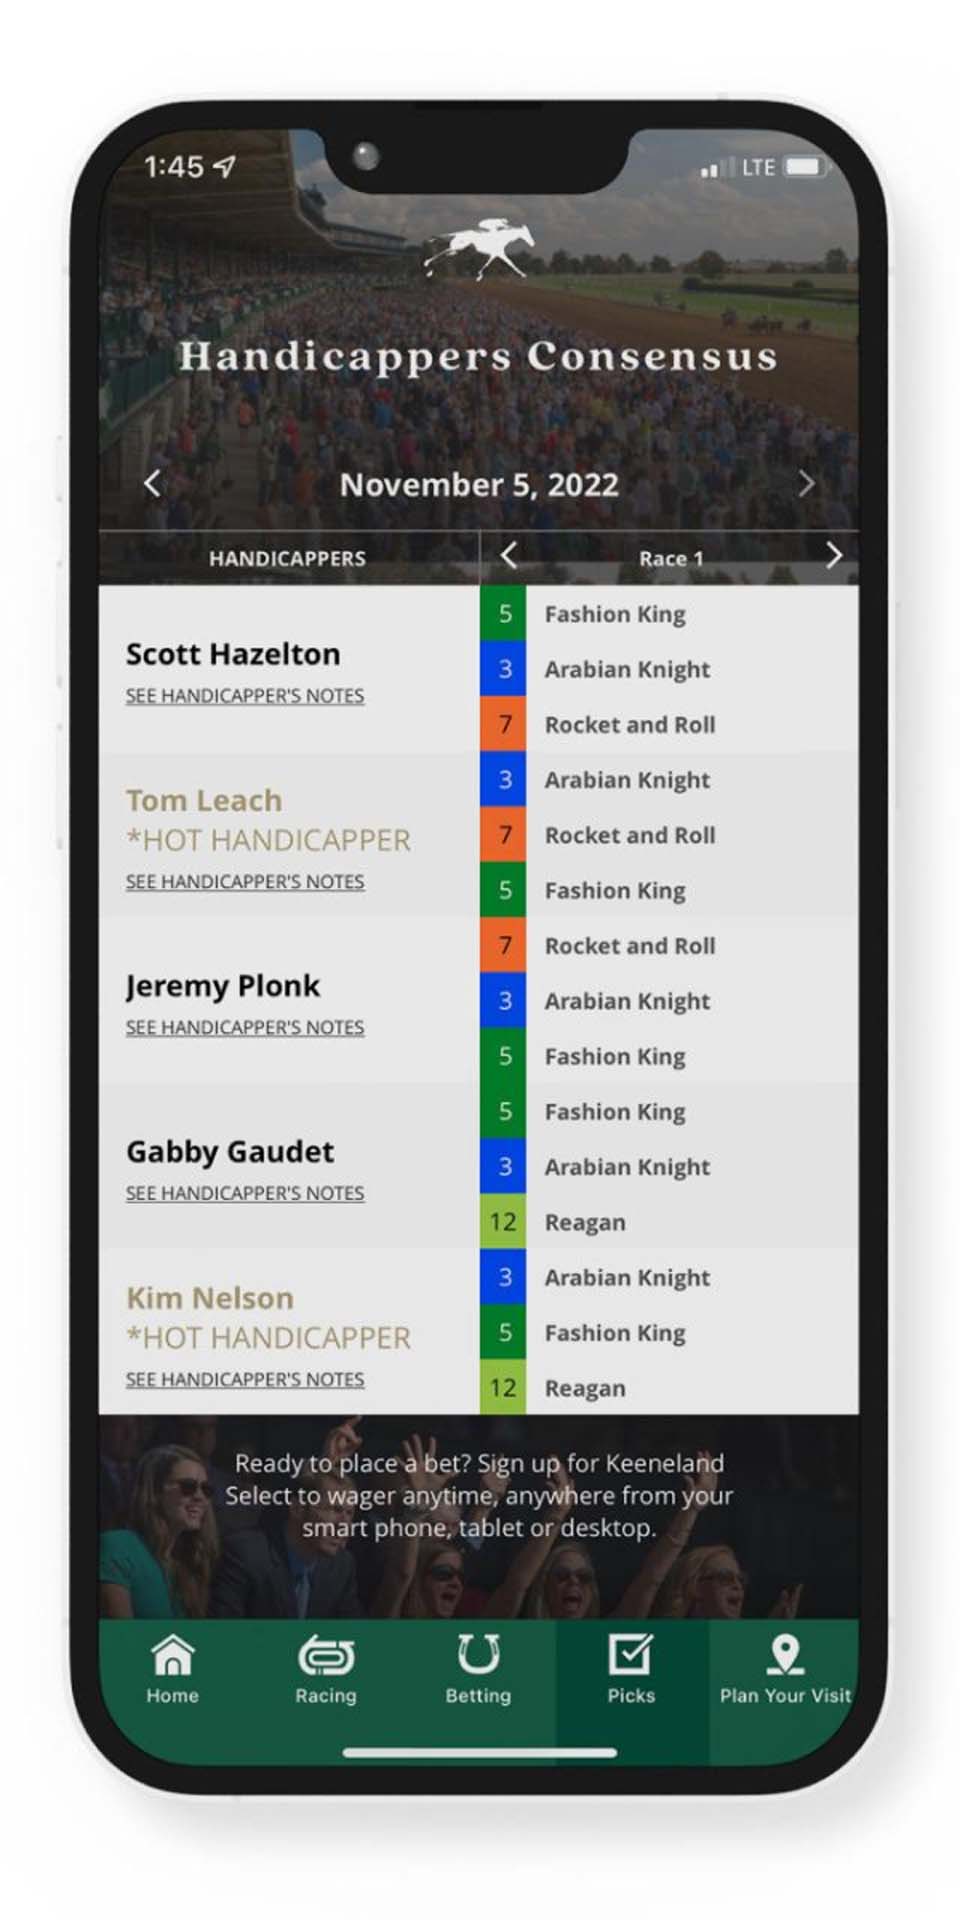 A screenshot of the Handicappers Consensus page on the Keeneland Race Day App